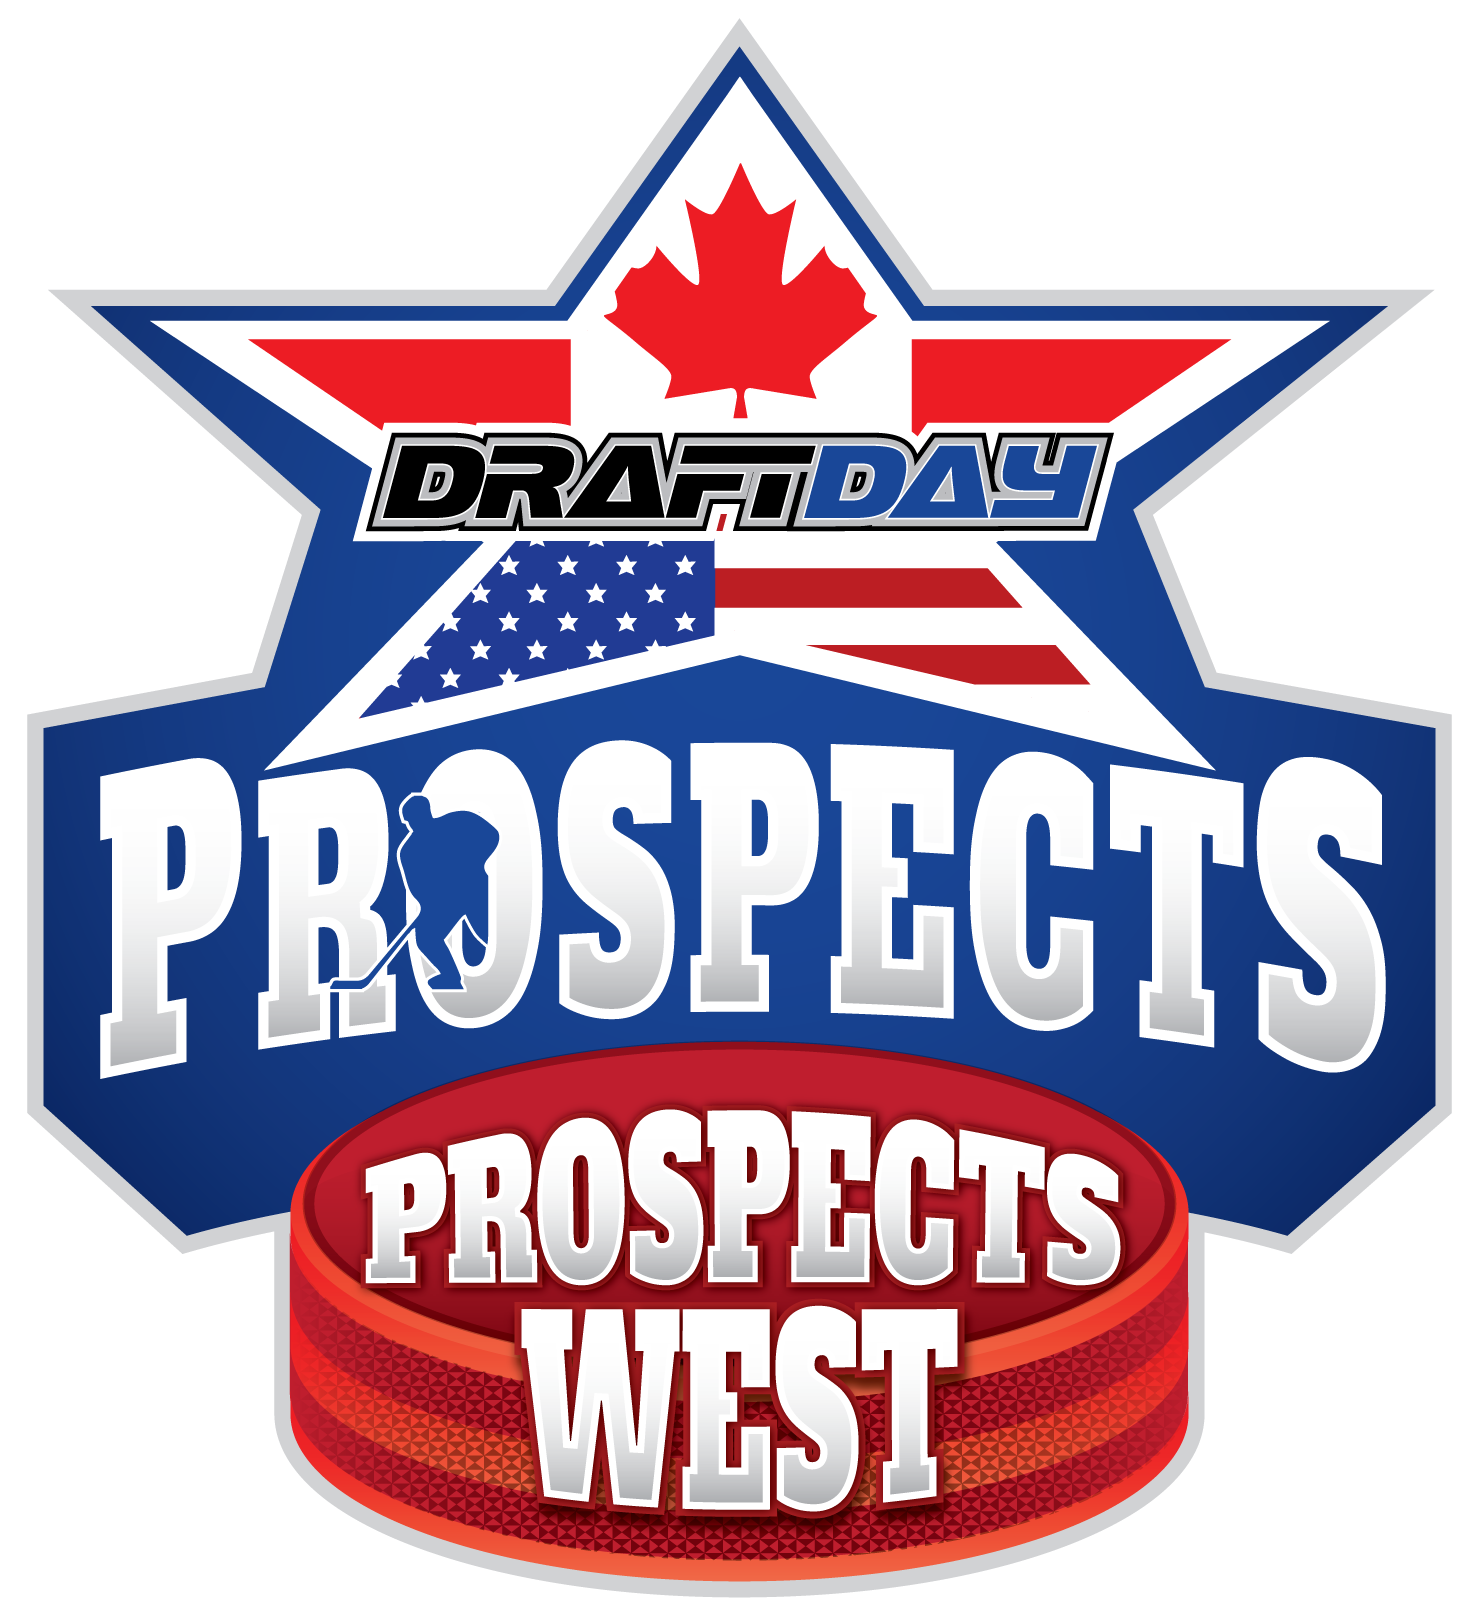 Team Prospects West